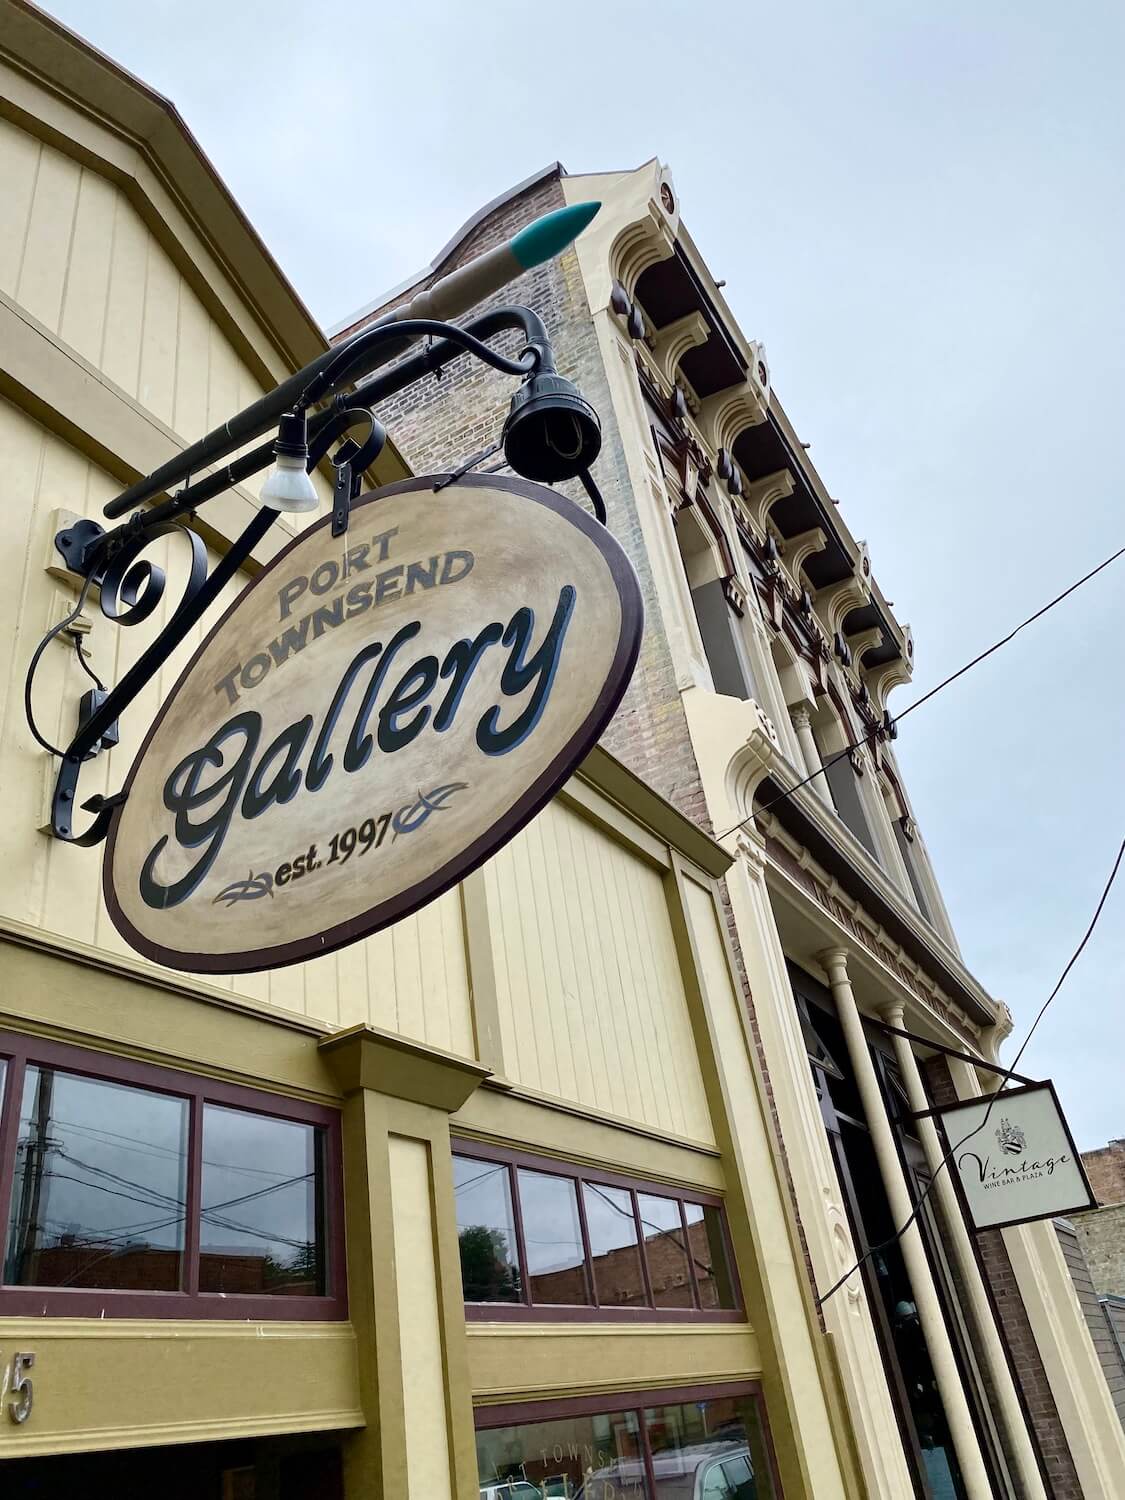 An ornate Gallery sign is posted on a street with yellow and mustard green trim underneath an elegant victorian themed building. Art is a fun thing to do in Port Townsend, Washington